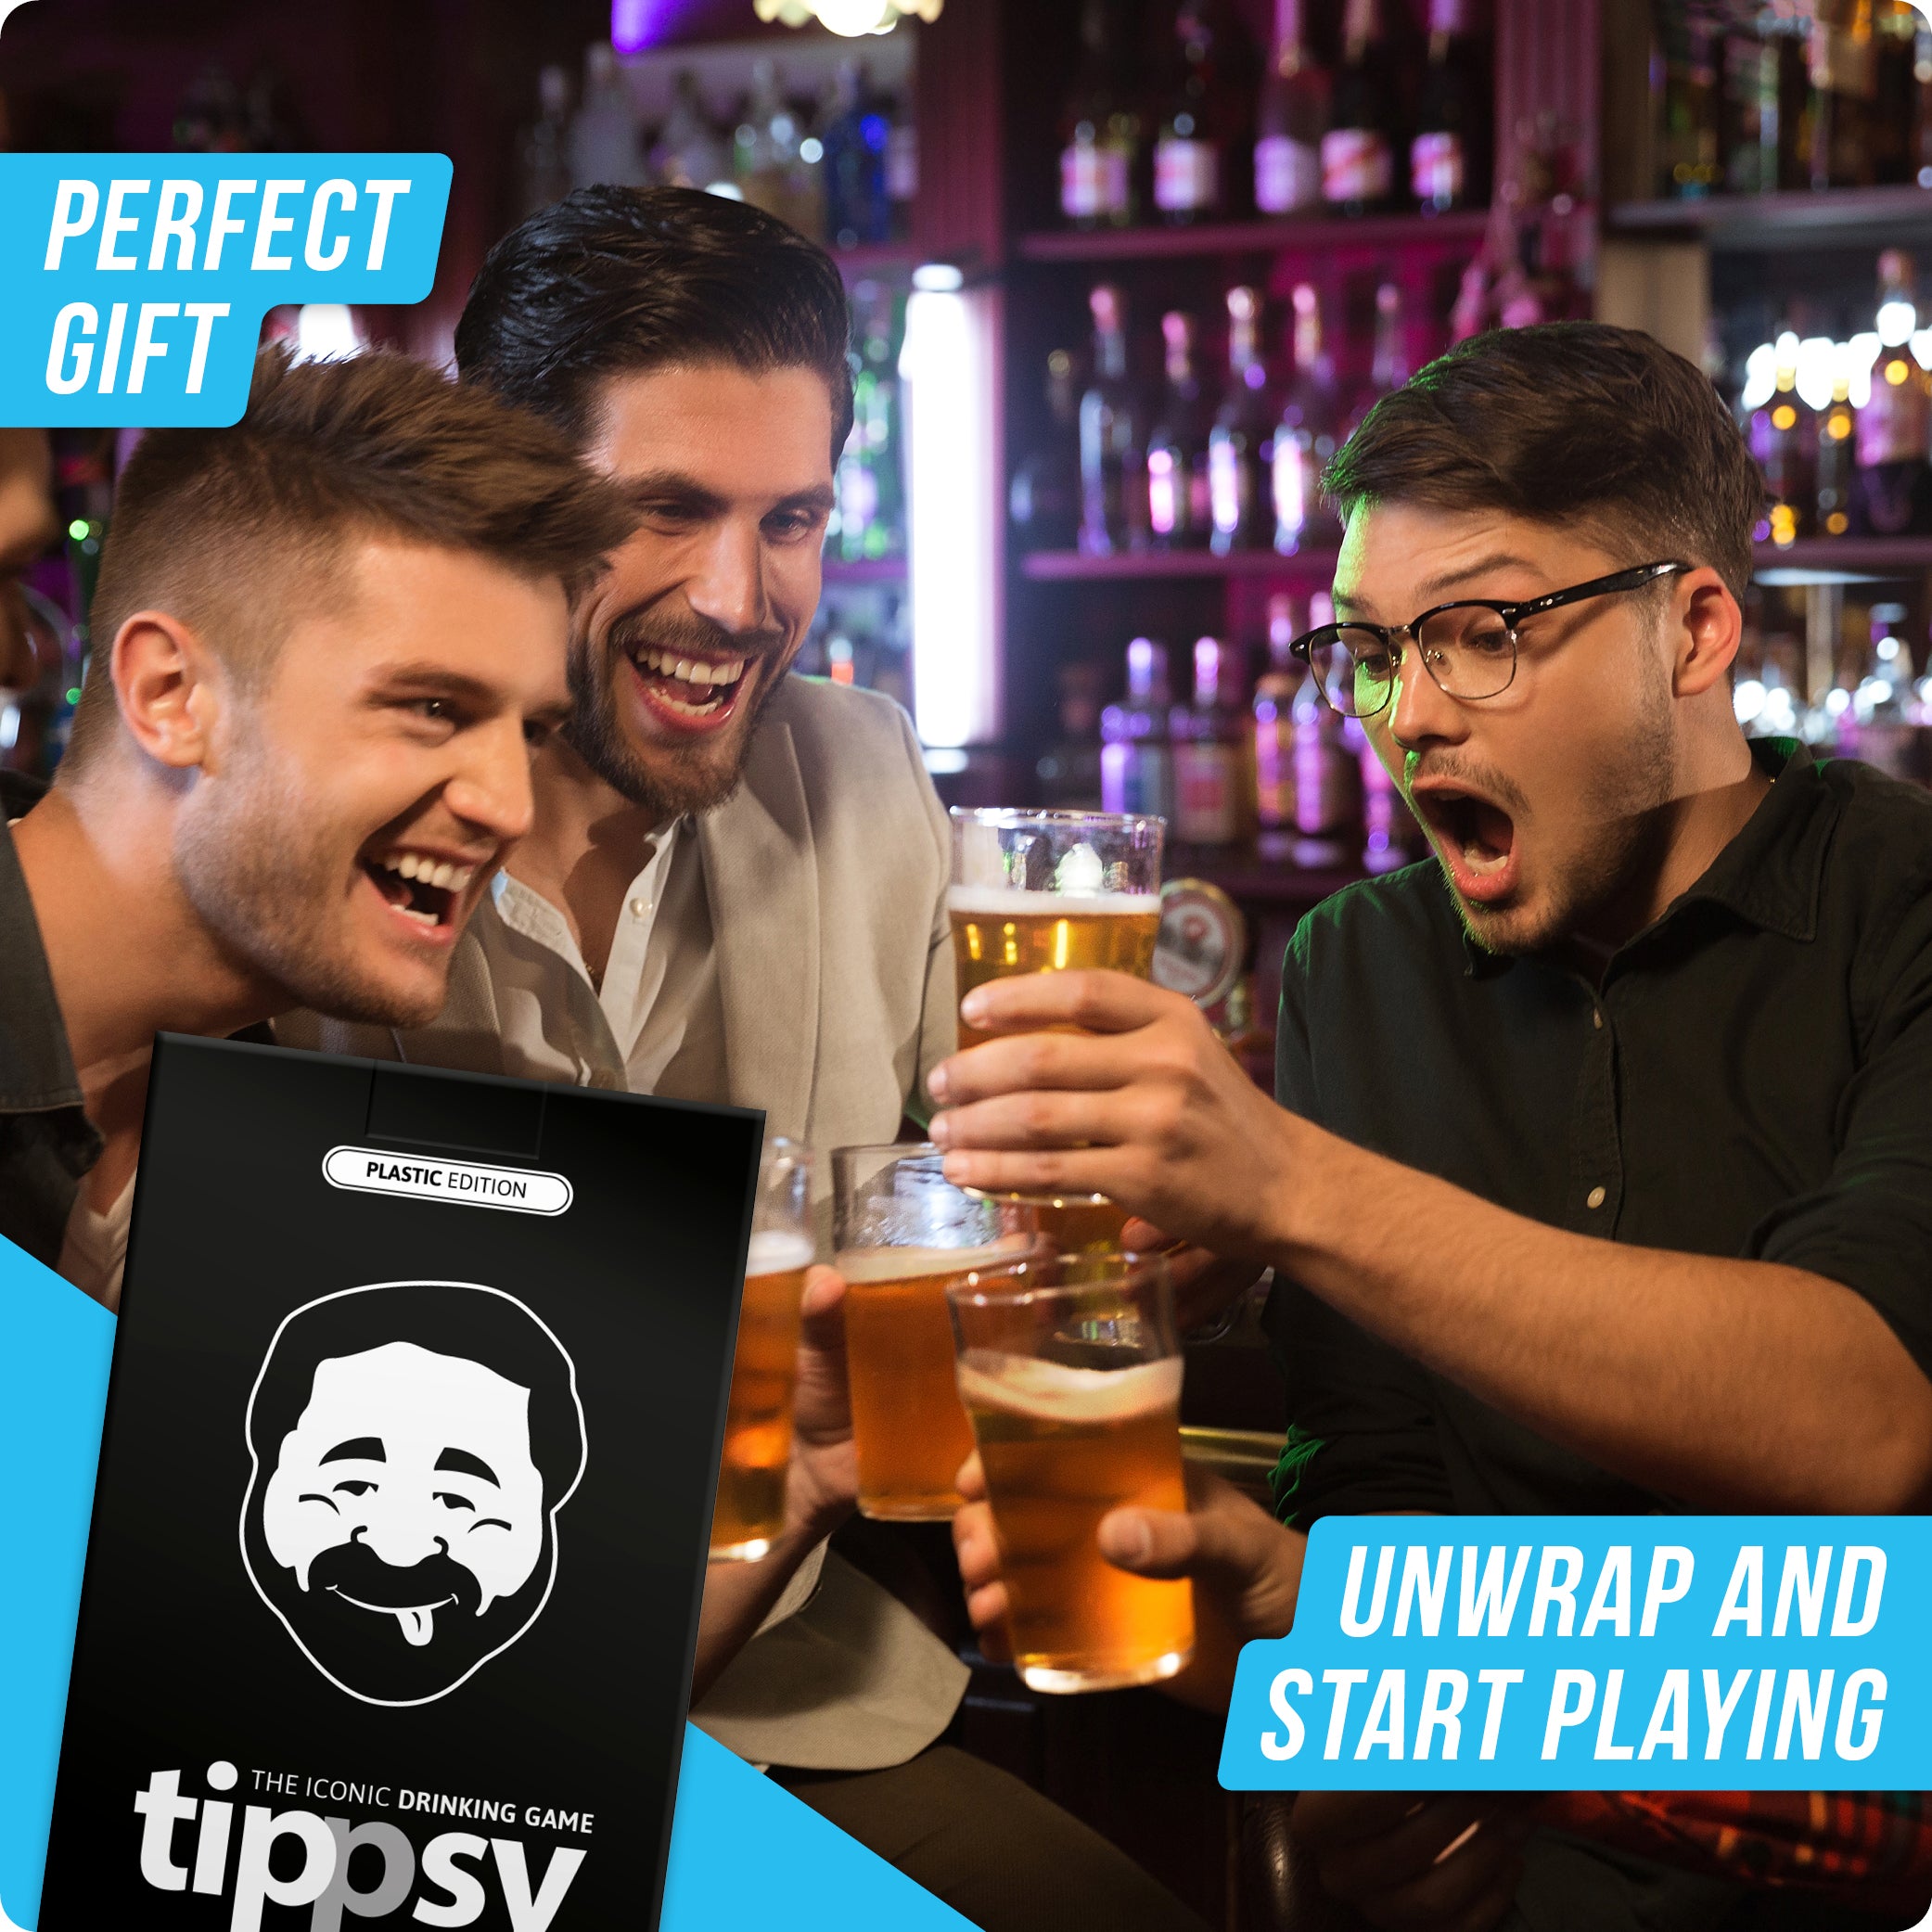 tippsy | English | Waterproof Edition – "The iconic drinking game."